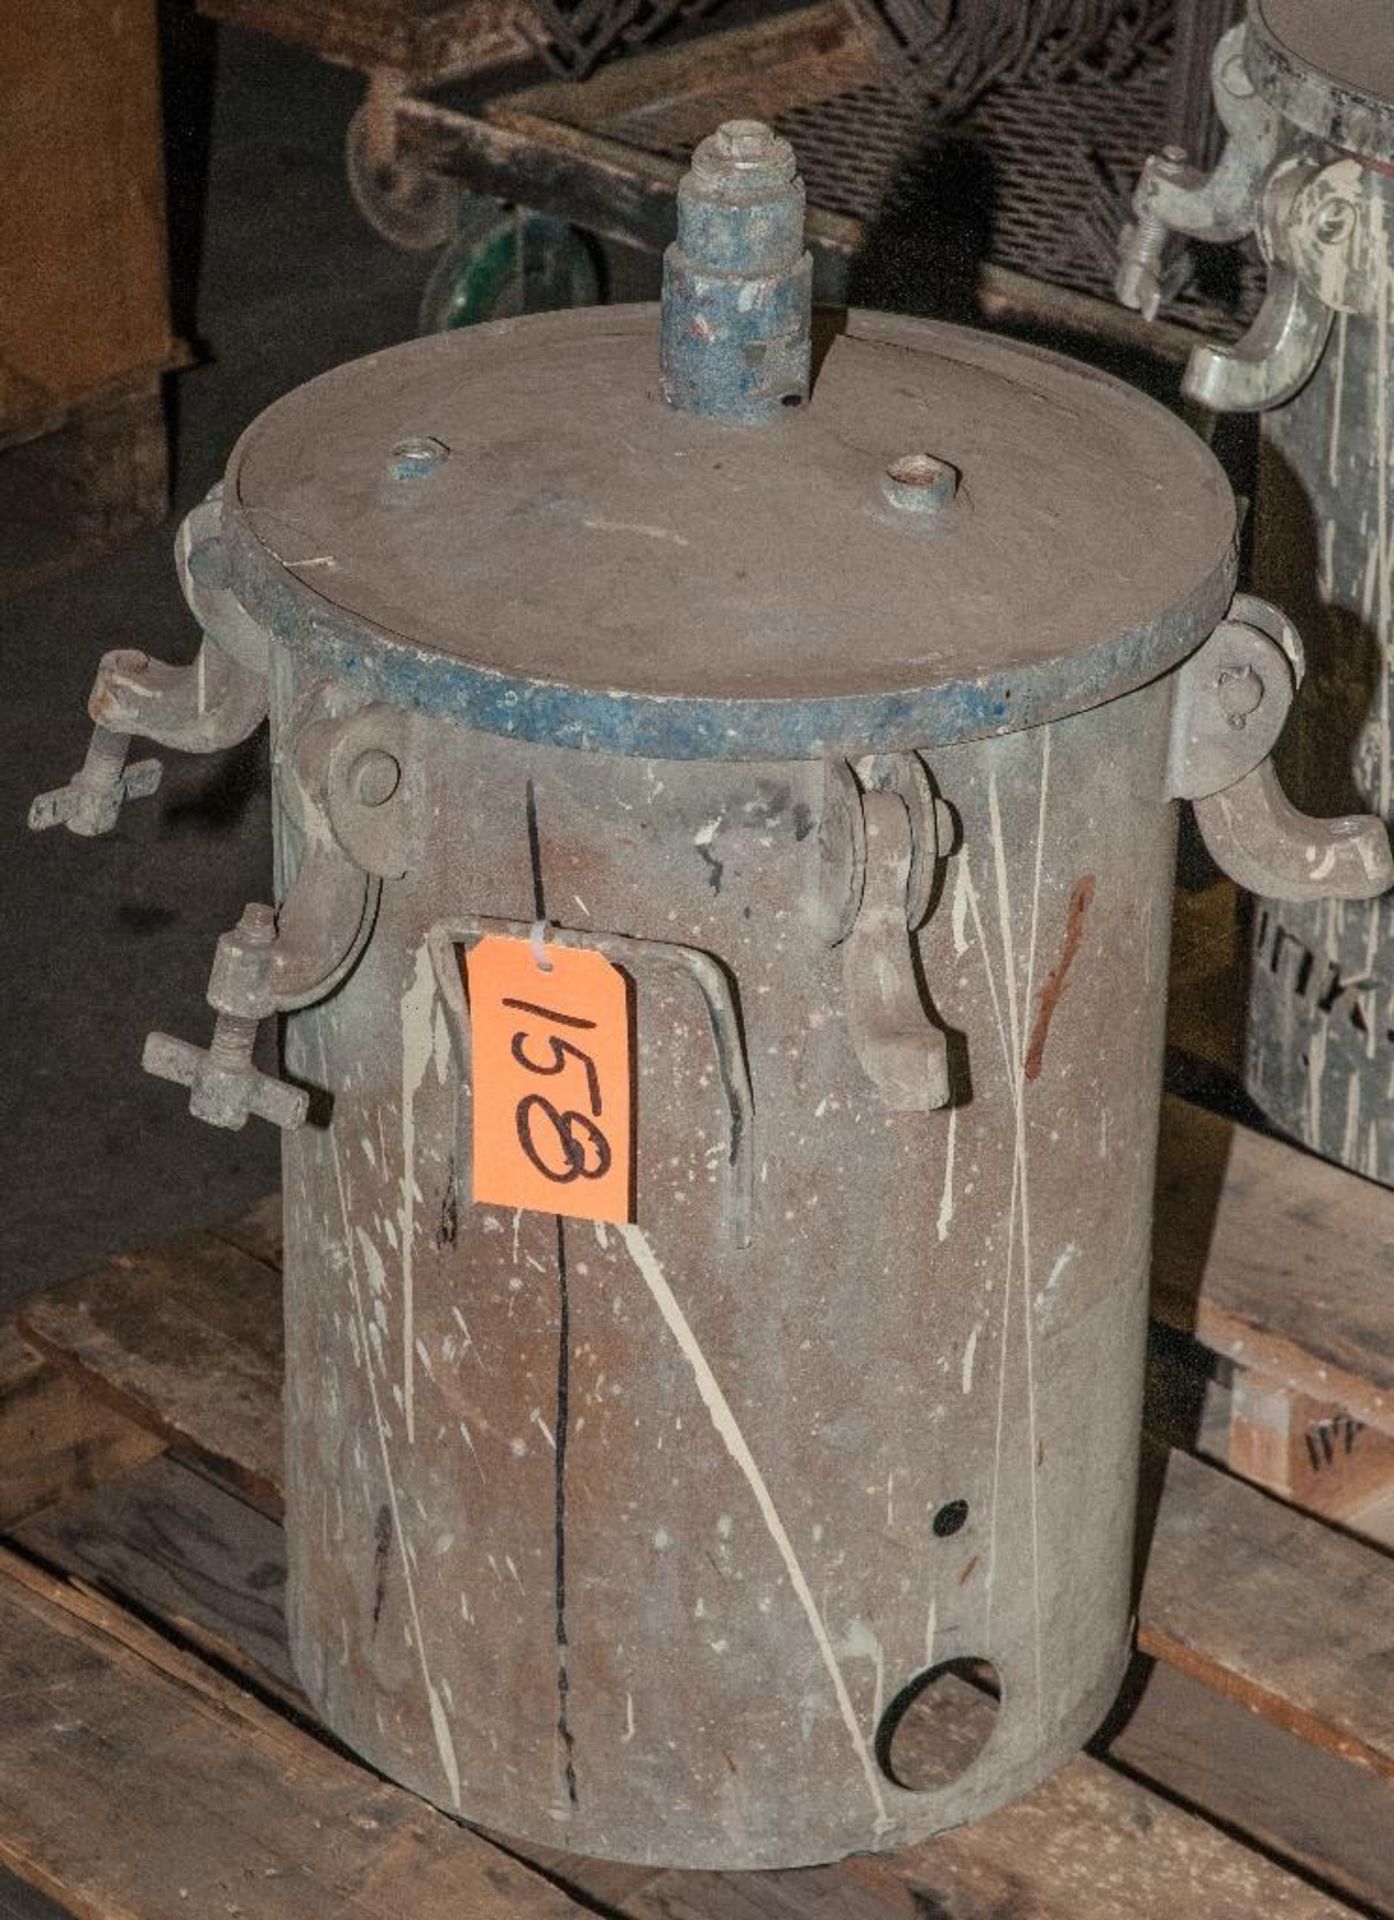 Spray Paint Pressure Pot Tank, Guessing 8 Gal?, LOCATED-Super Steel 7900 W. Tower Ave Milwaukee, WI